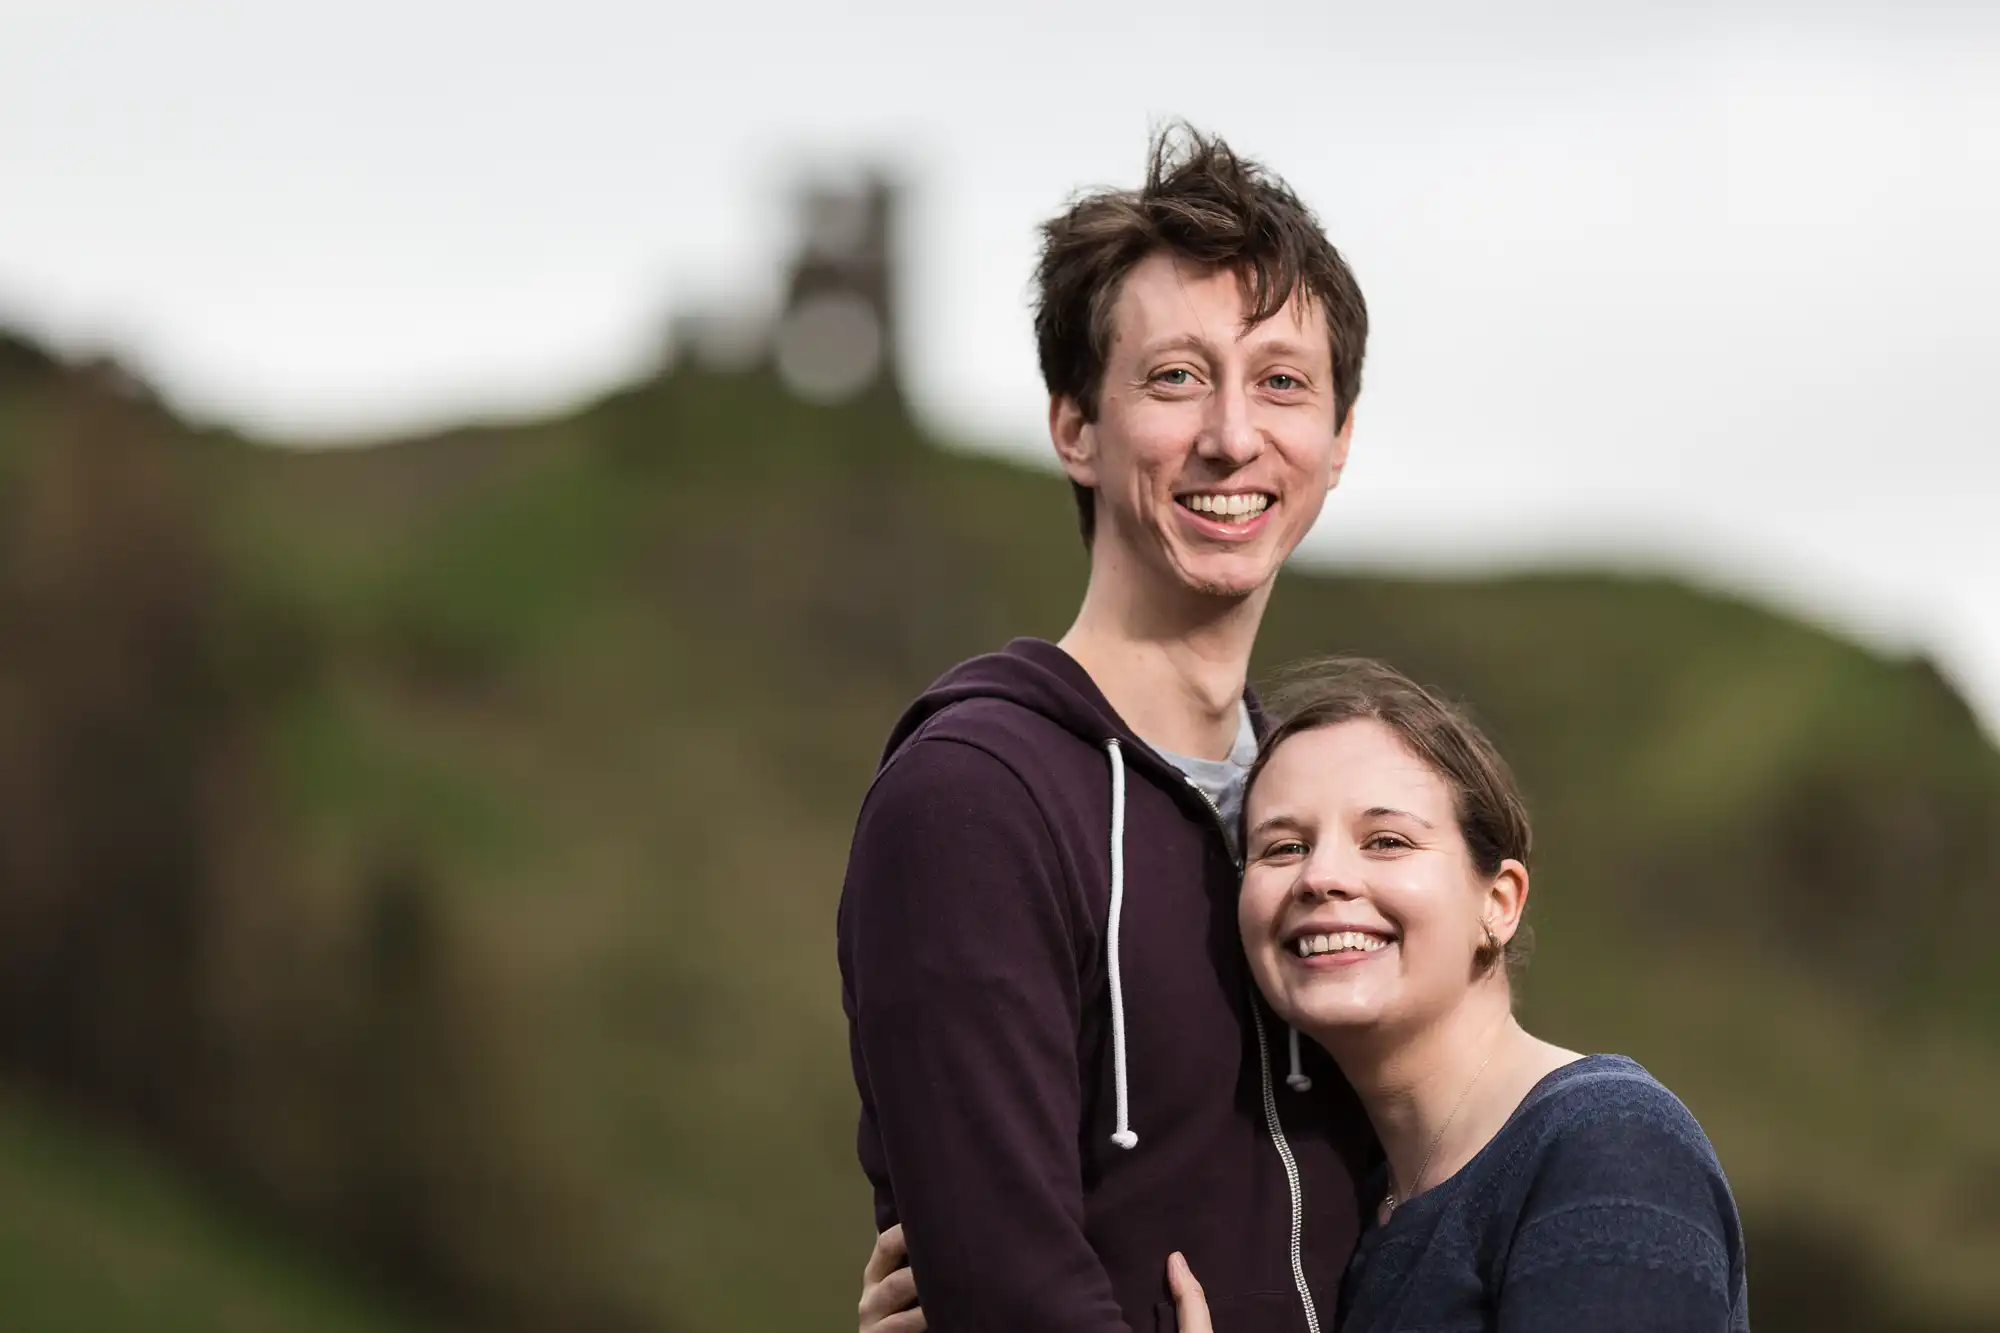 A smiling young couple embracing outdoors with a blurred historic tower and green hills in the background.